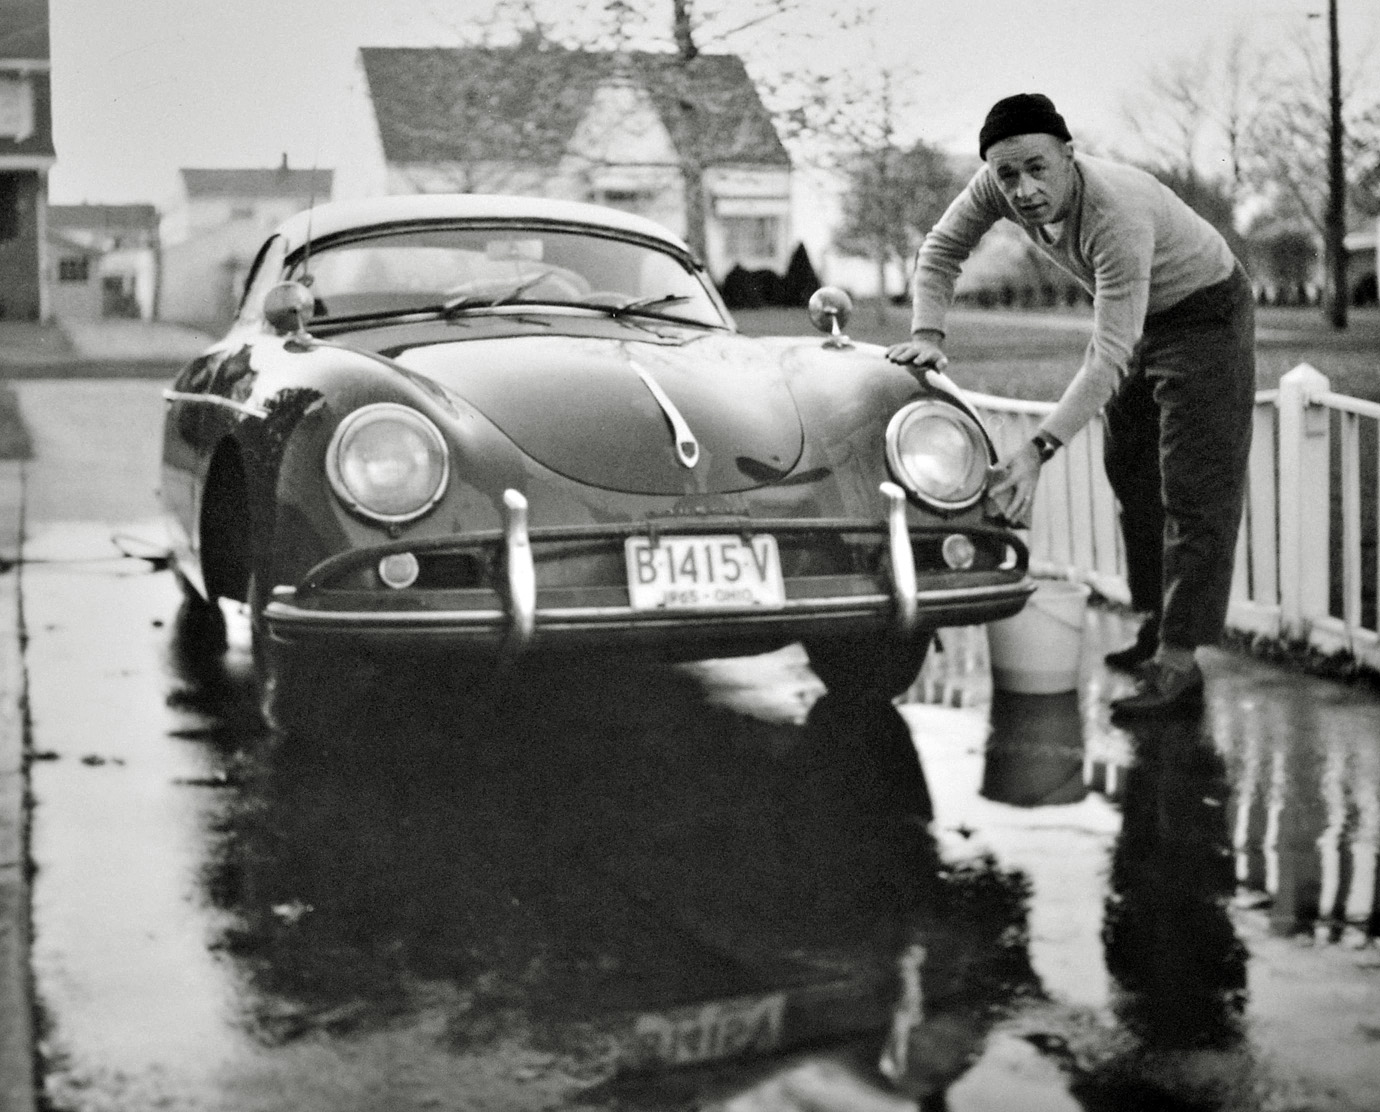 My dad always loved those little sports cars. Ohio. View full size.